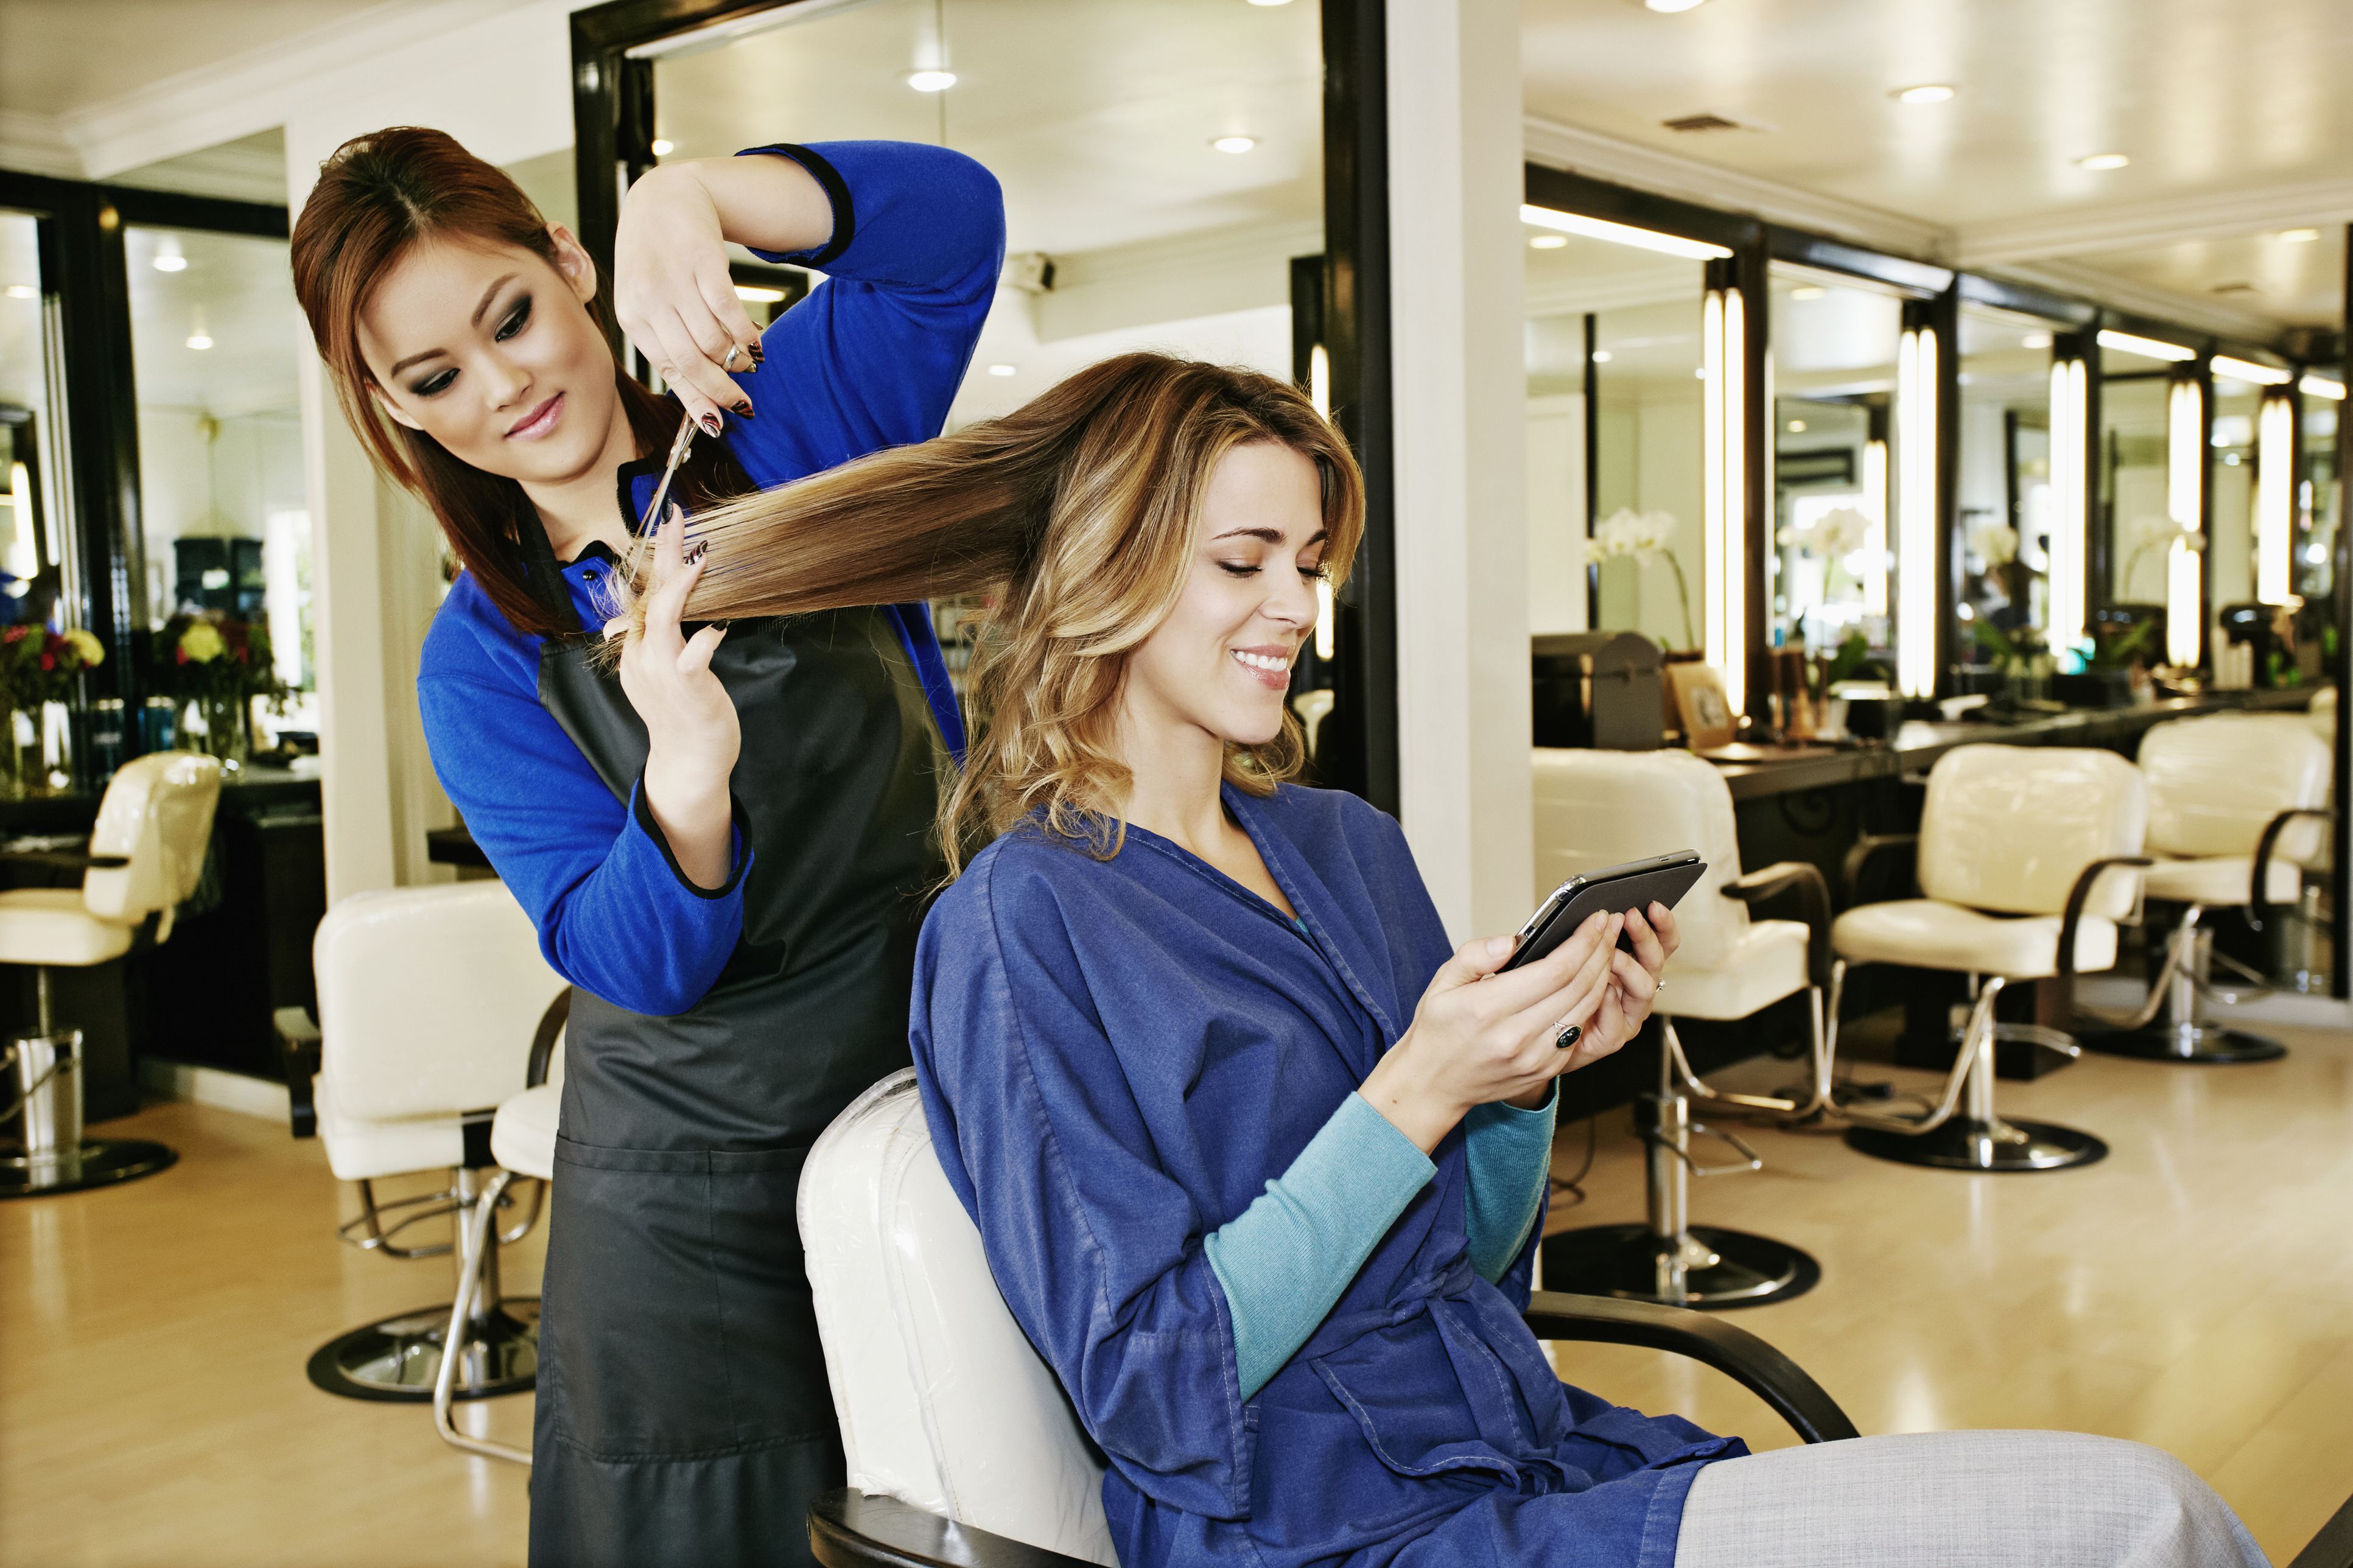 Gratuity at Salons: How Much to Tip for a Haircut